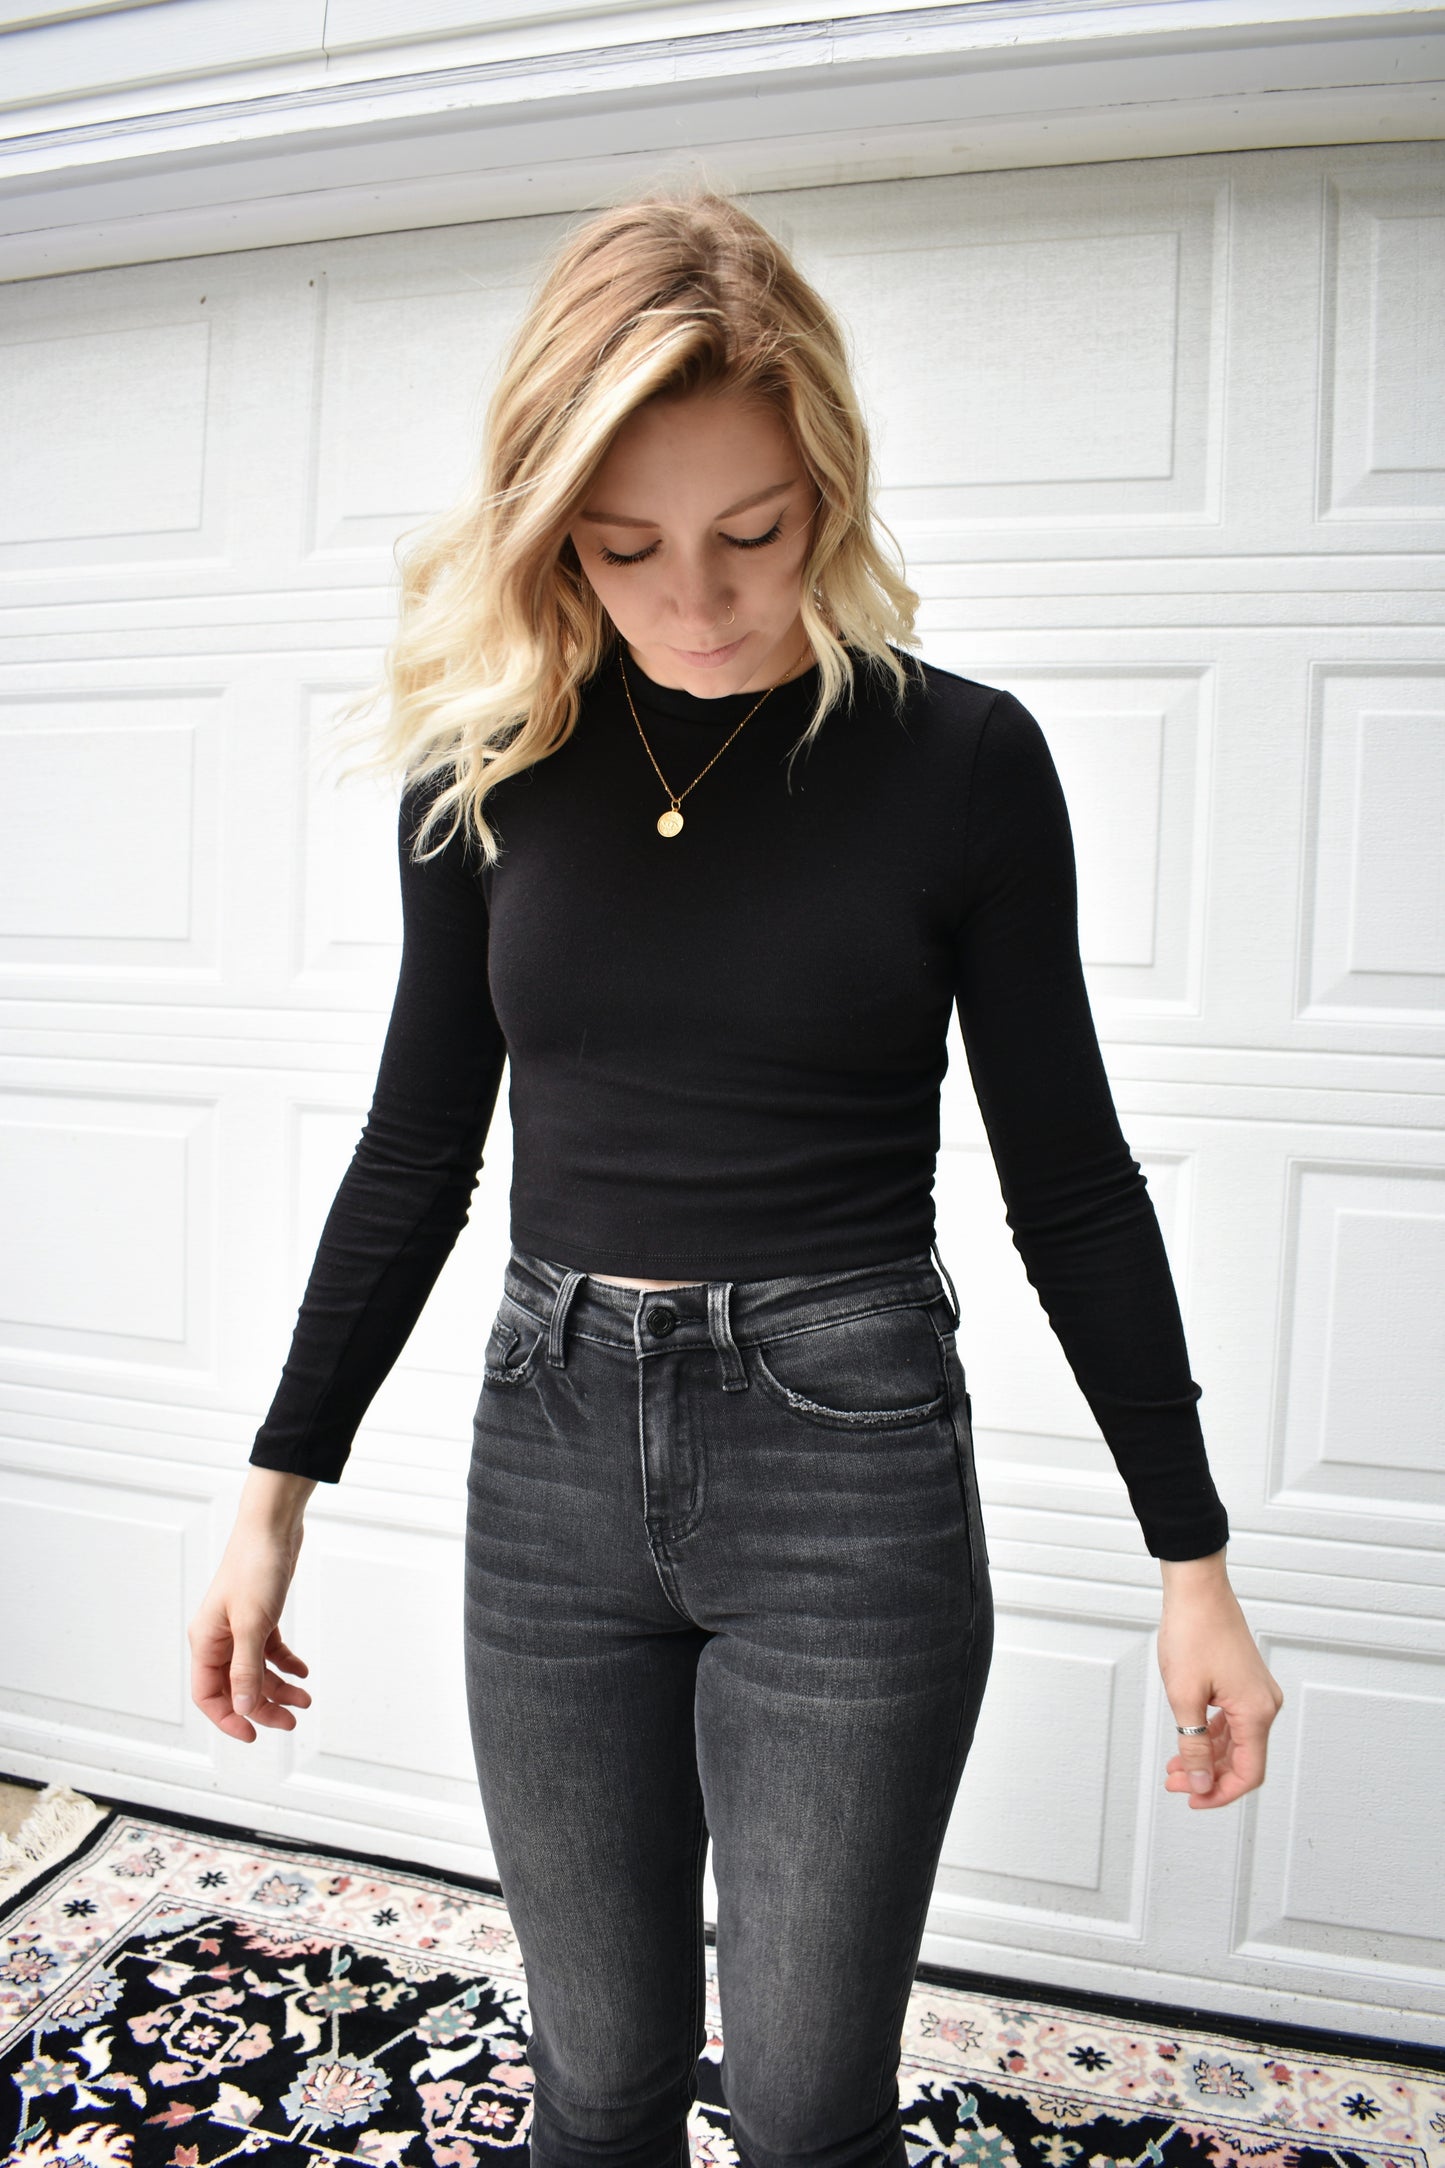 black long steeve essential fitted cropped top with round neck. Stretchy, comfortable, the brand is Hyfve.